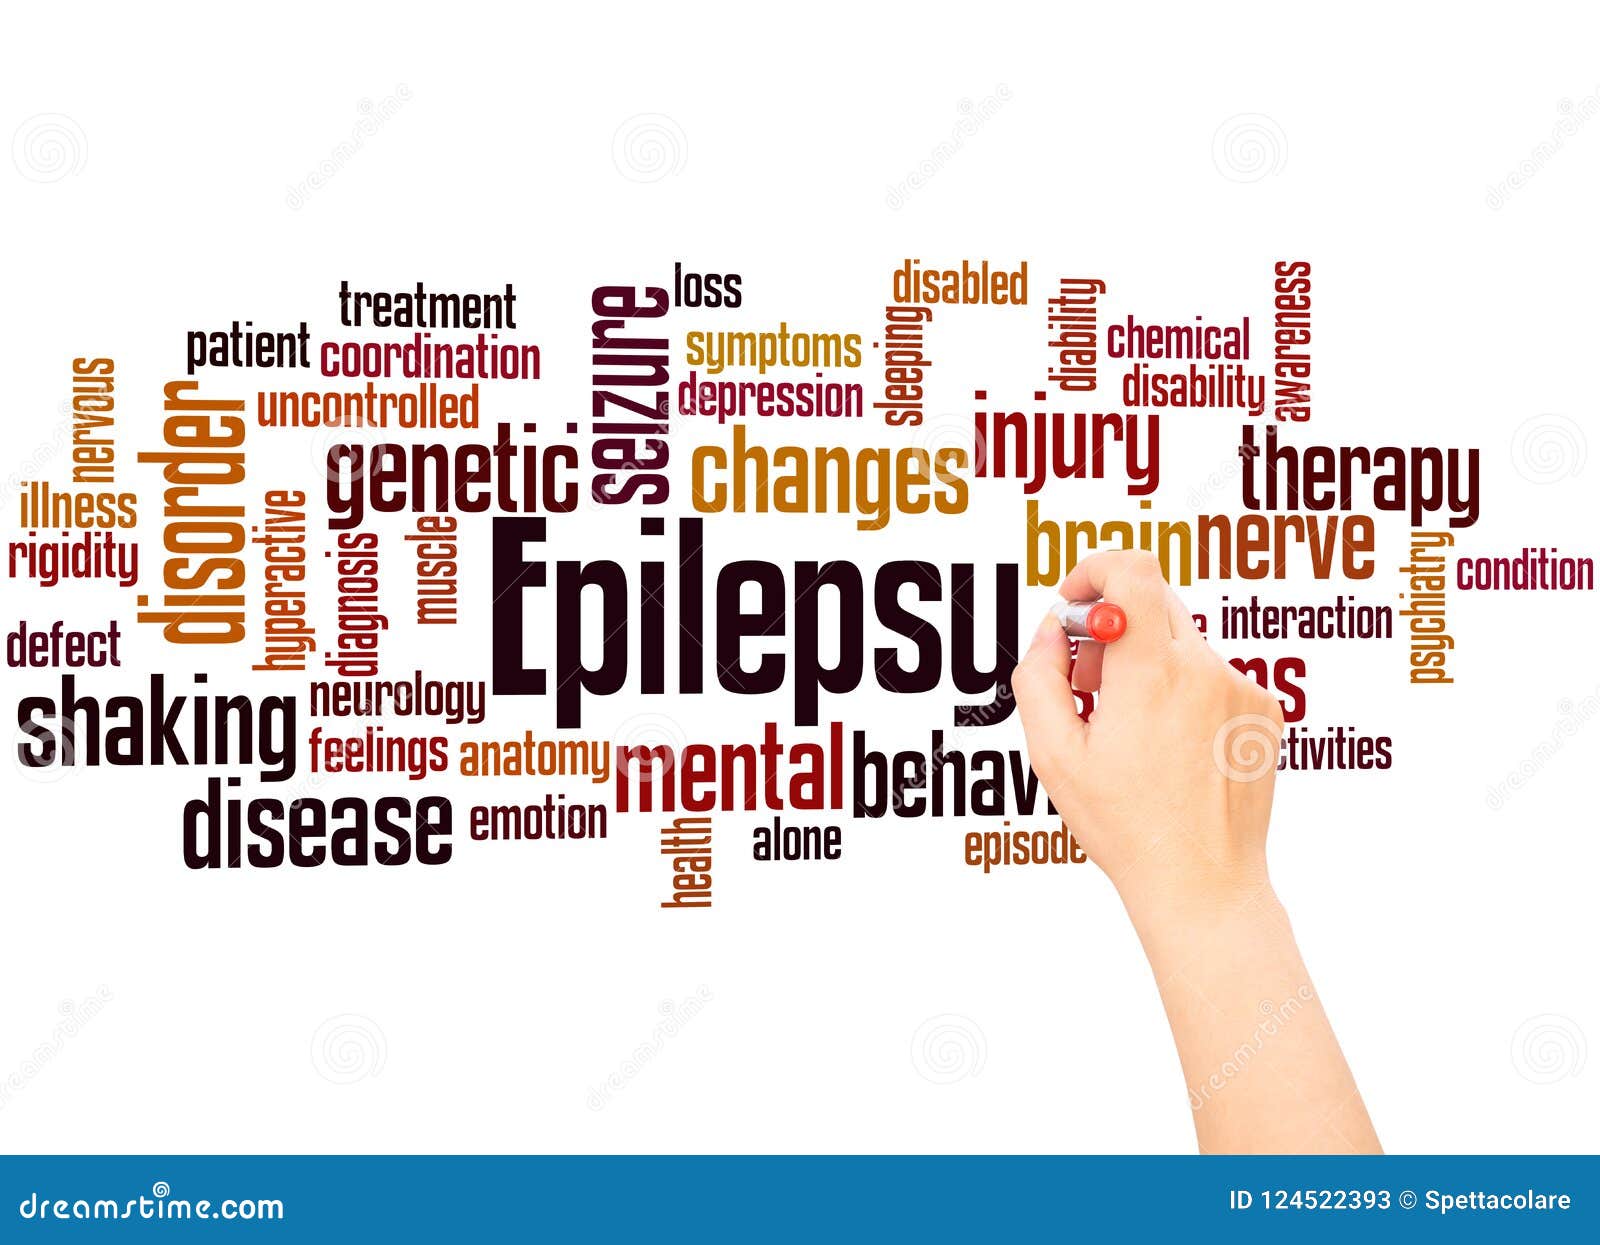 epilepsy word cloud and hand writing concept